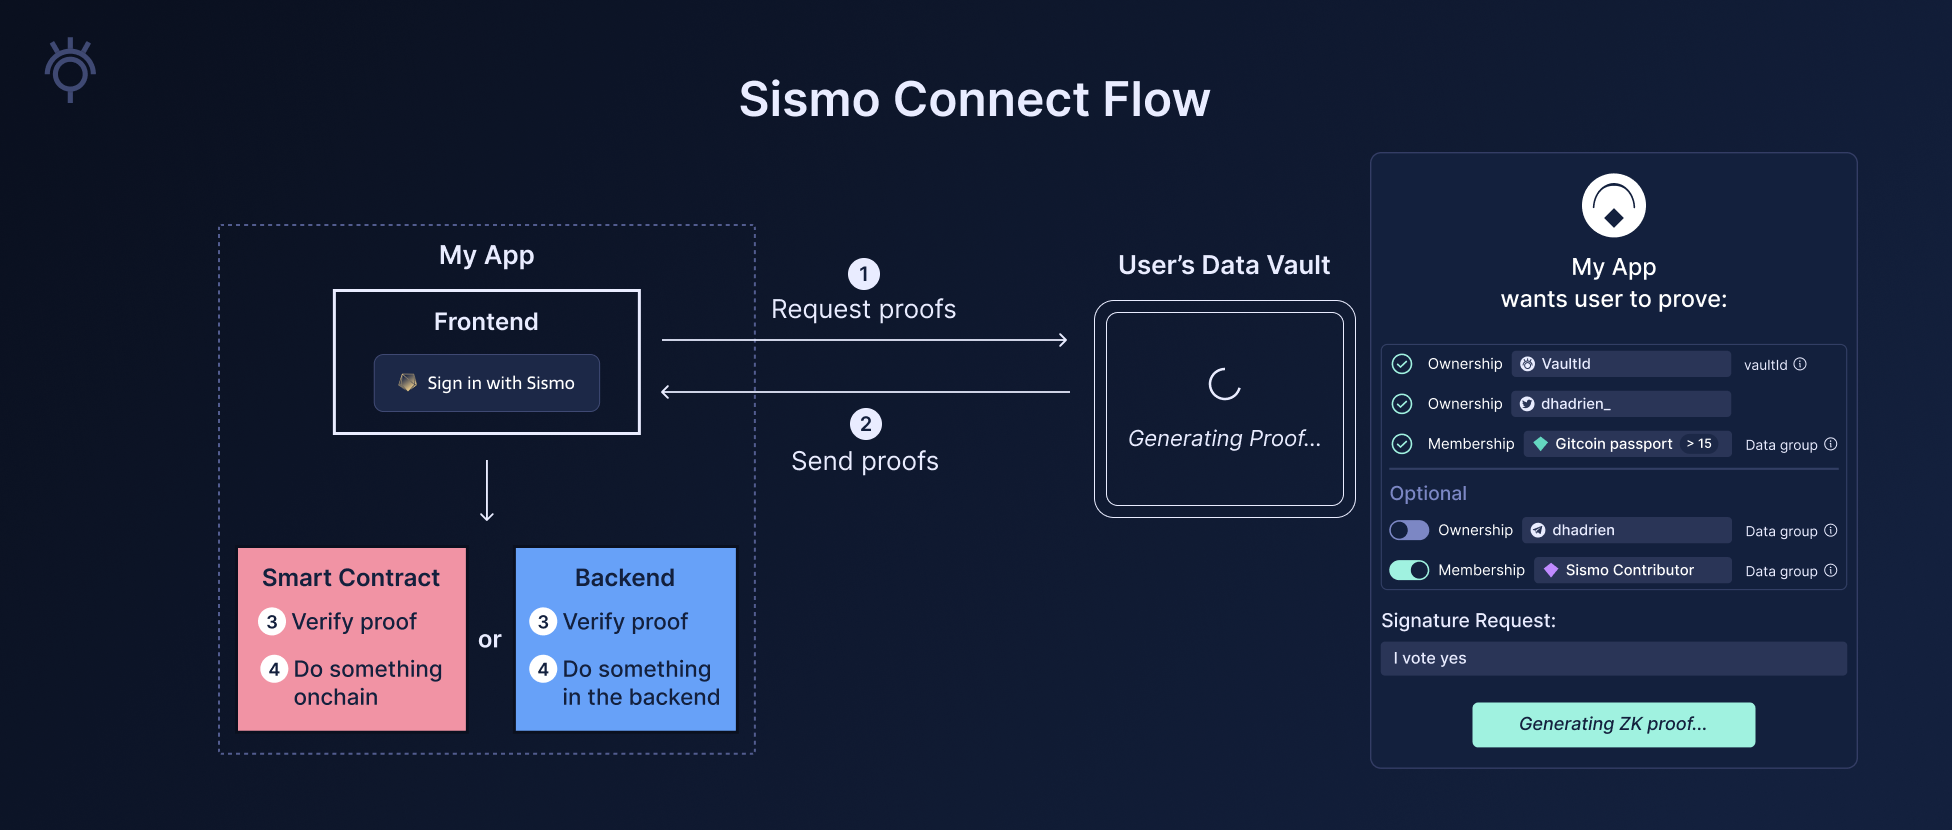 Sismo Connect Flow